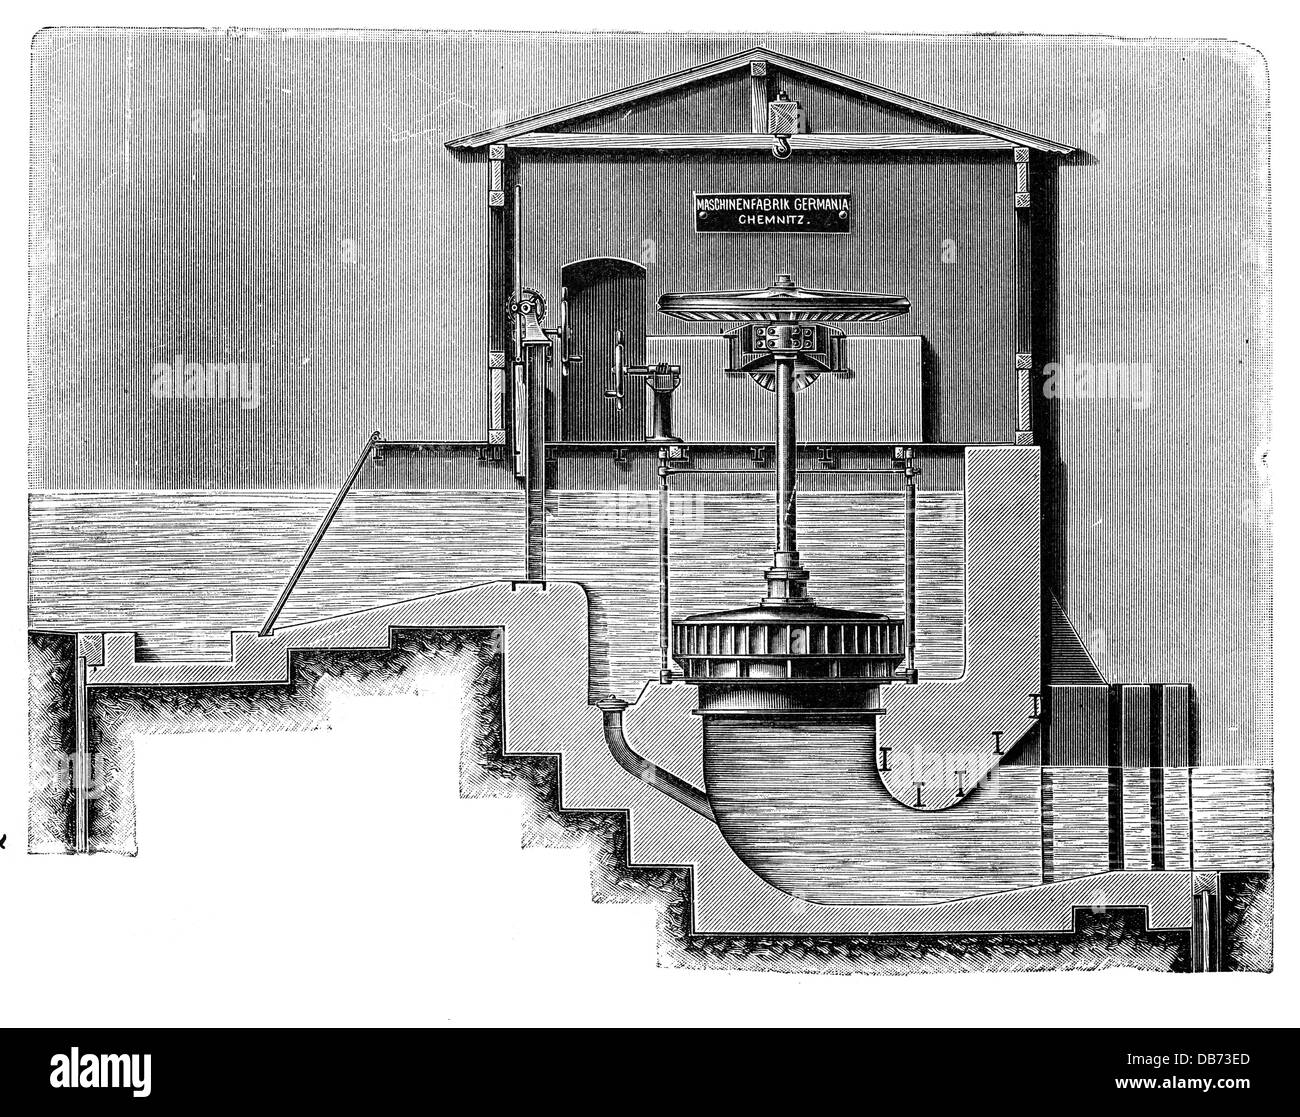 energy, water, turbines, Francis turbine, built by Germania machine factory, Chemnitz, functional principle, longitudinal section, wood engraving, late 19th century, 19th century, generator, generators, electric power, generation of current, electricity generation, power production, power generation, turbines, water power, waterpower, hydropower, water powers, hydroelectricity, historic, historical, engineering, technics, technology, technologies, Additional-Rights-Clearences-Not Available Stock Photo